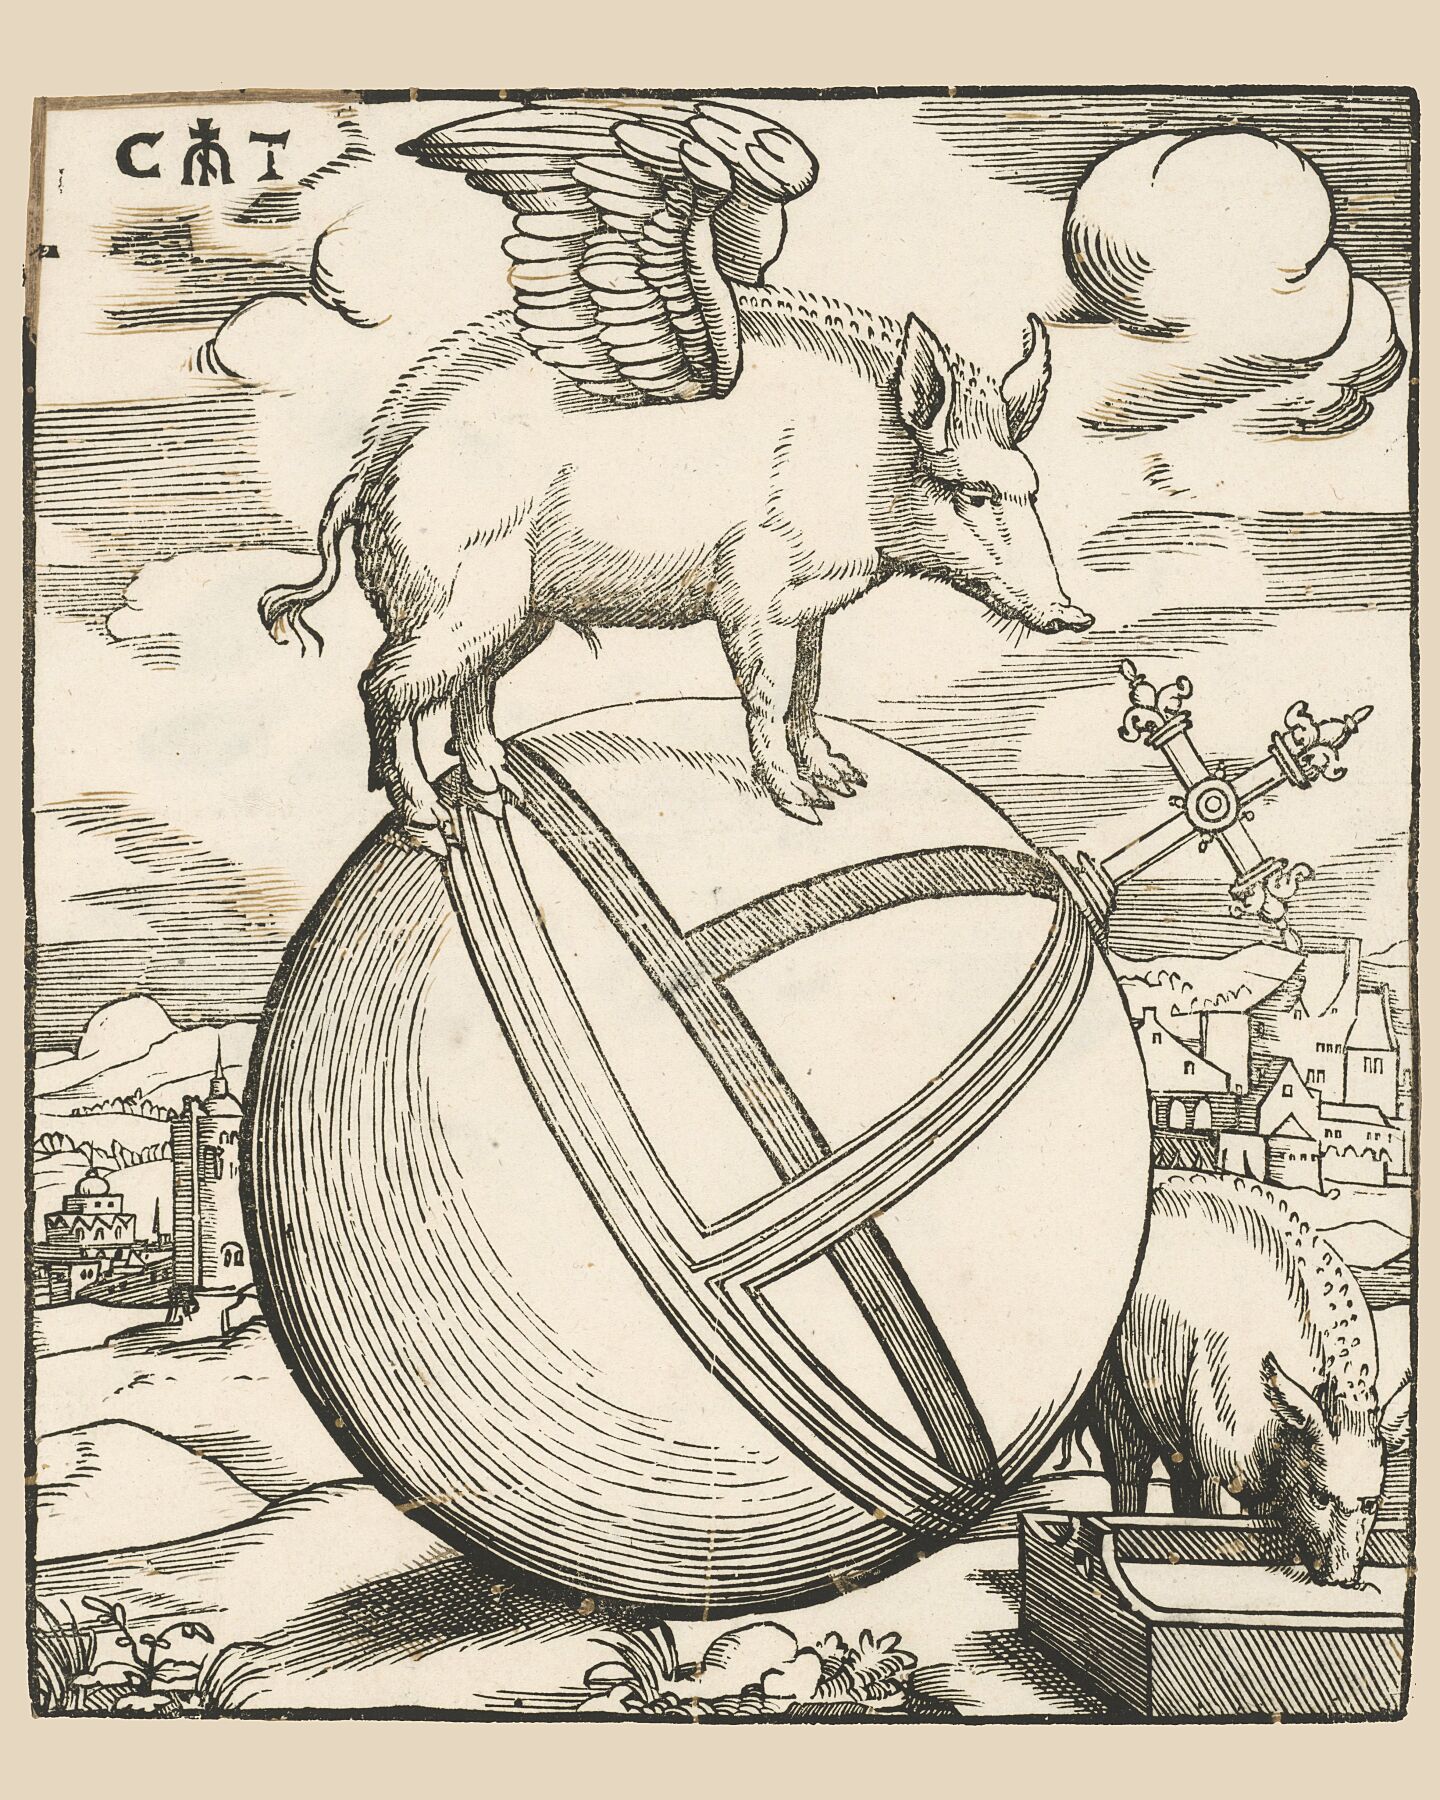 The Winged Pig in the World, Cornelis Anthonisz., 1541 - 1545